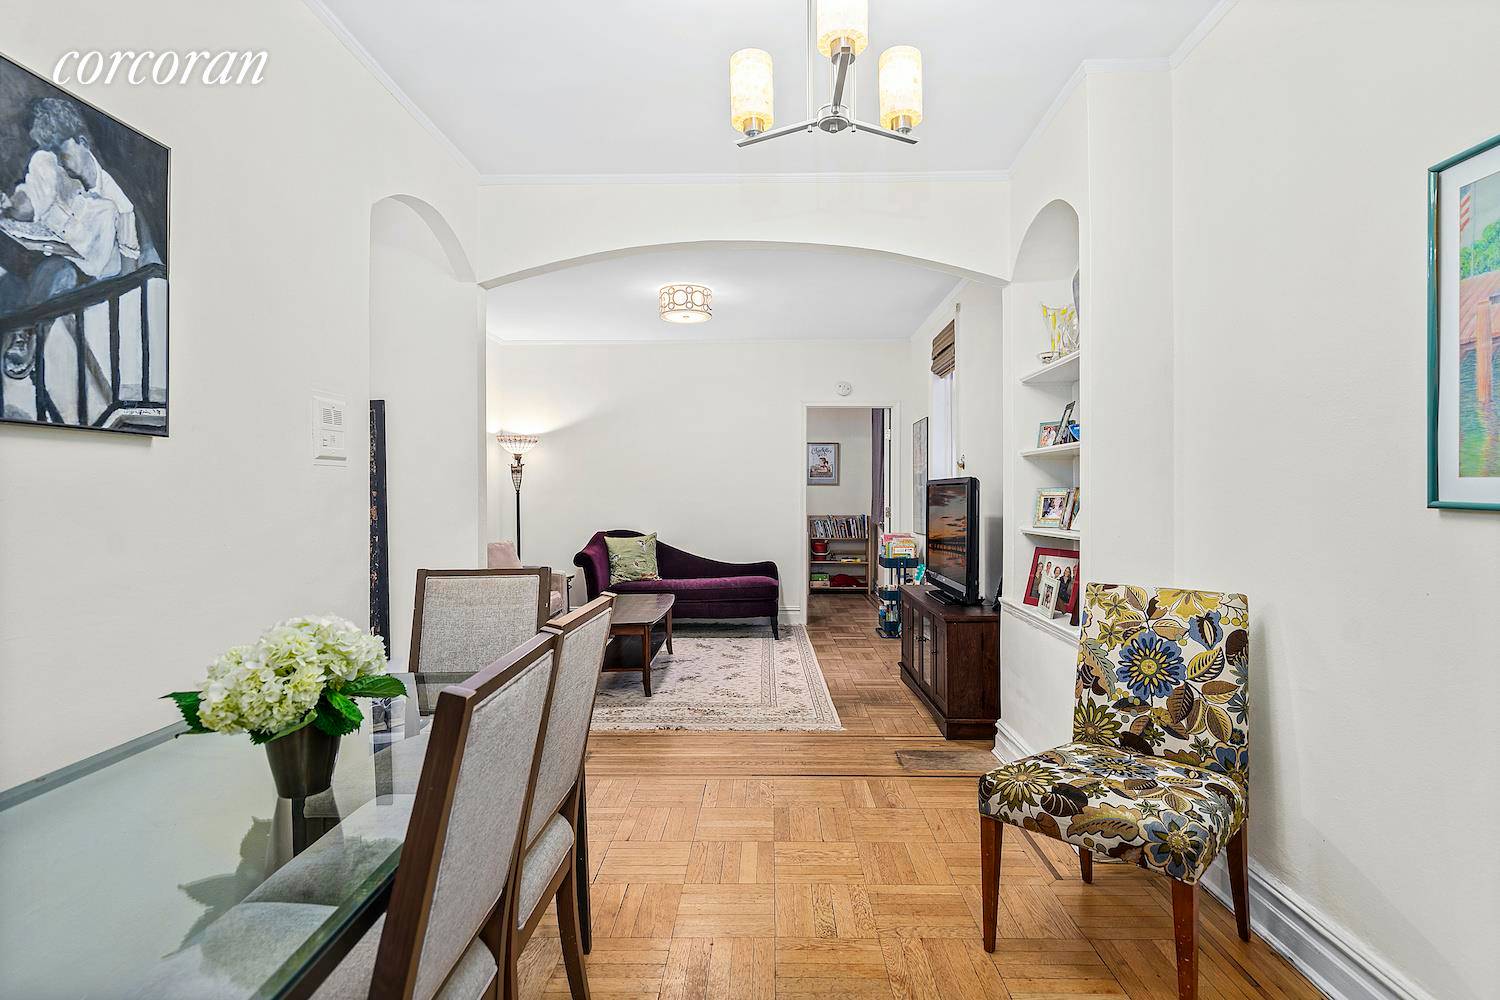 140 Eighth Avenue is coveted for its proximity to Prospect Park, bucolic double courtyard, and exemplary Art Deco details.